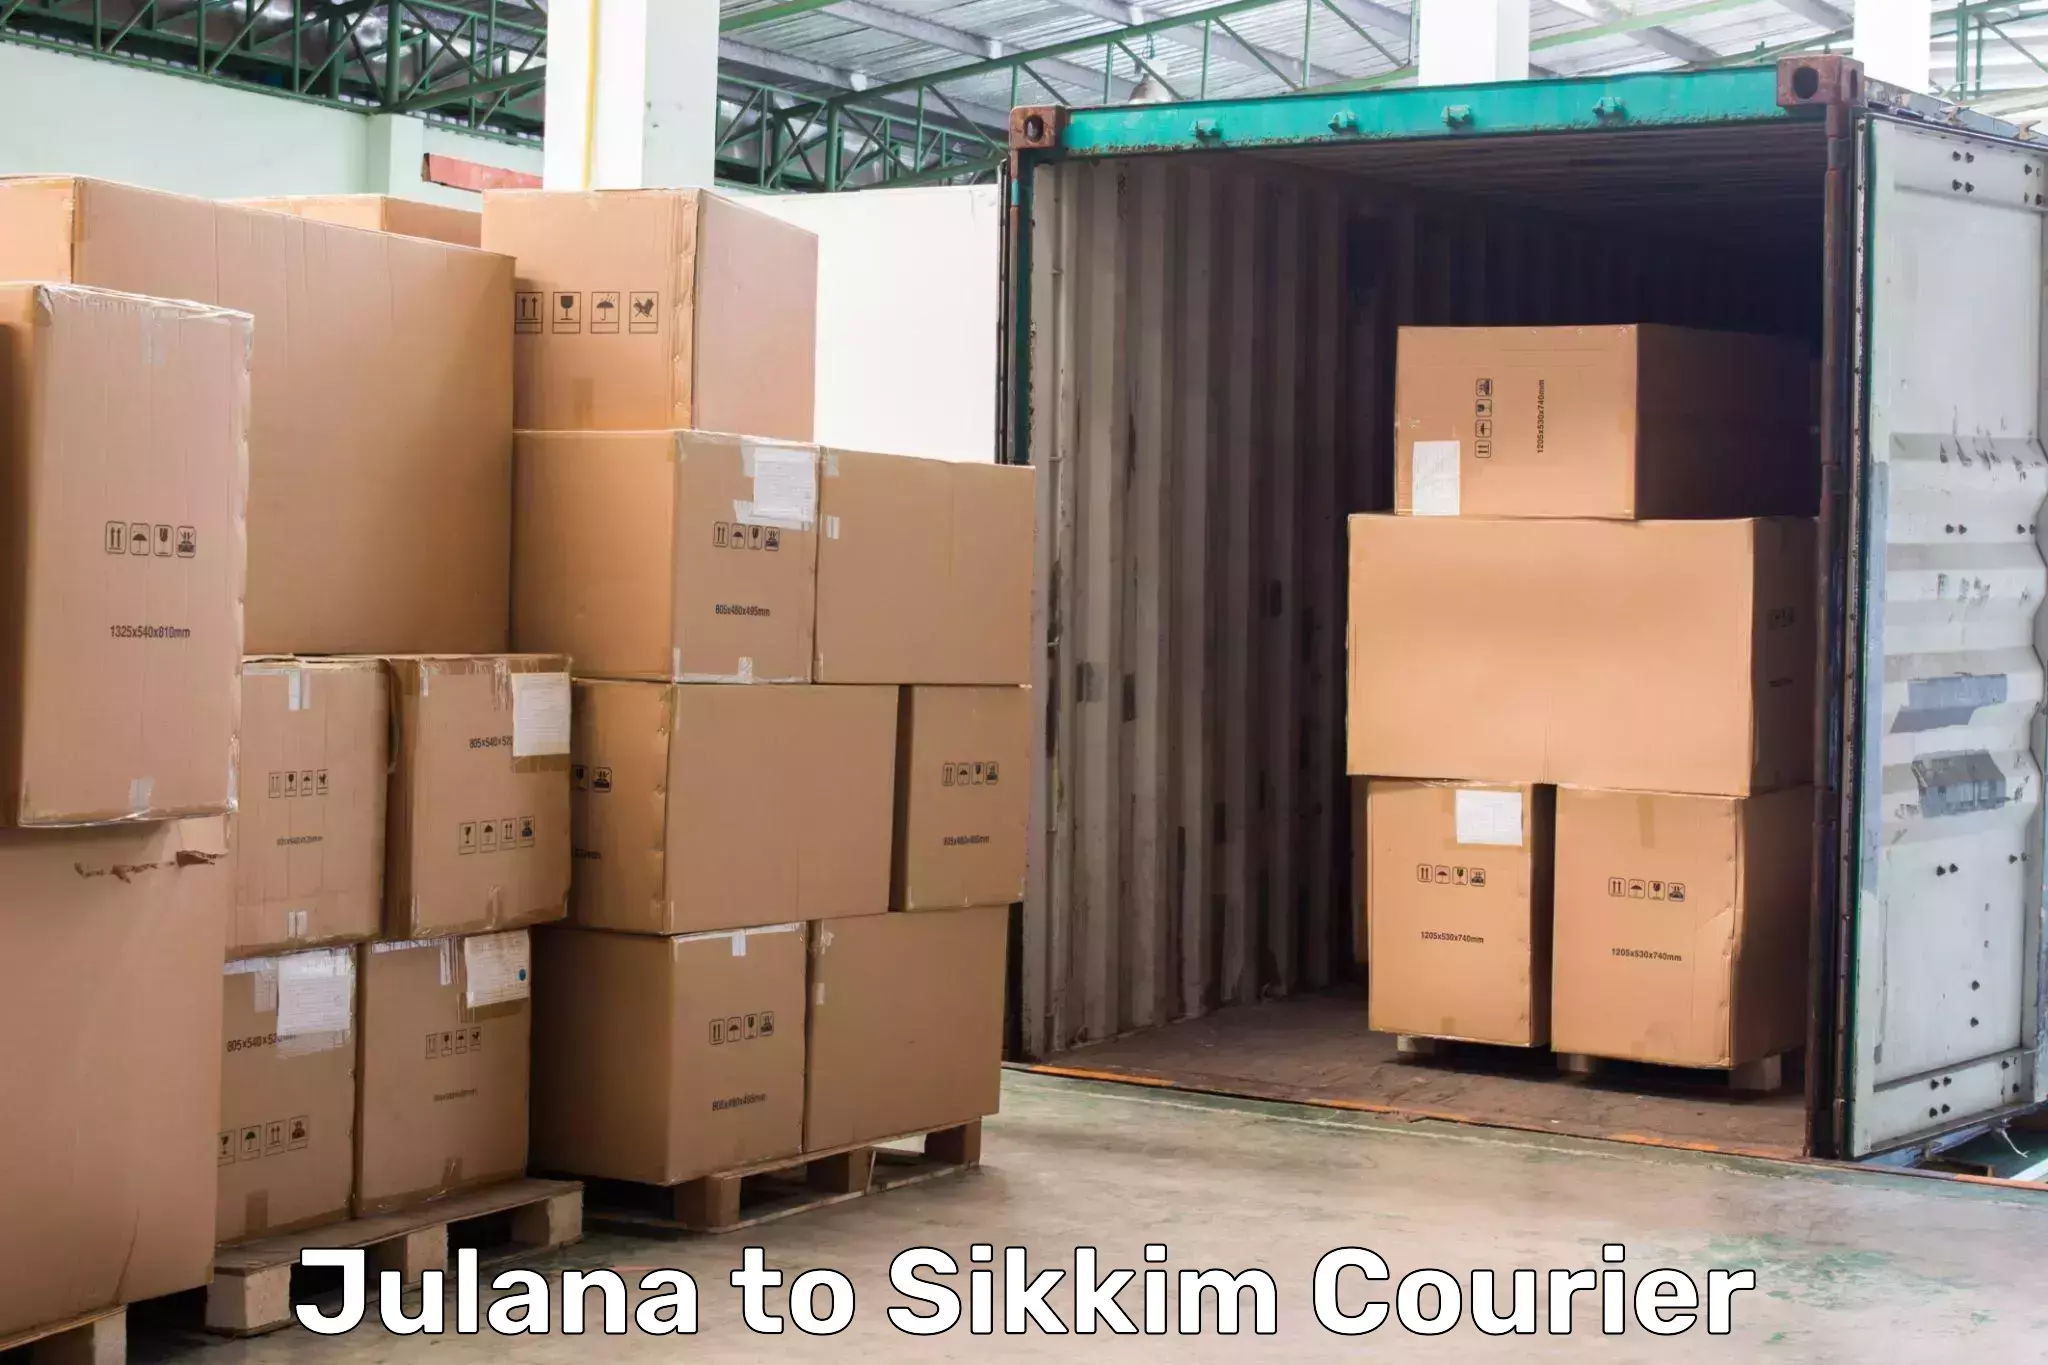 Courier service comparison Julana to Geyzing